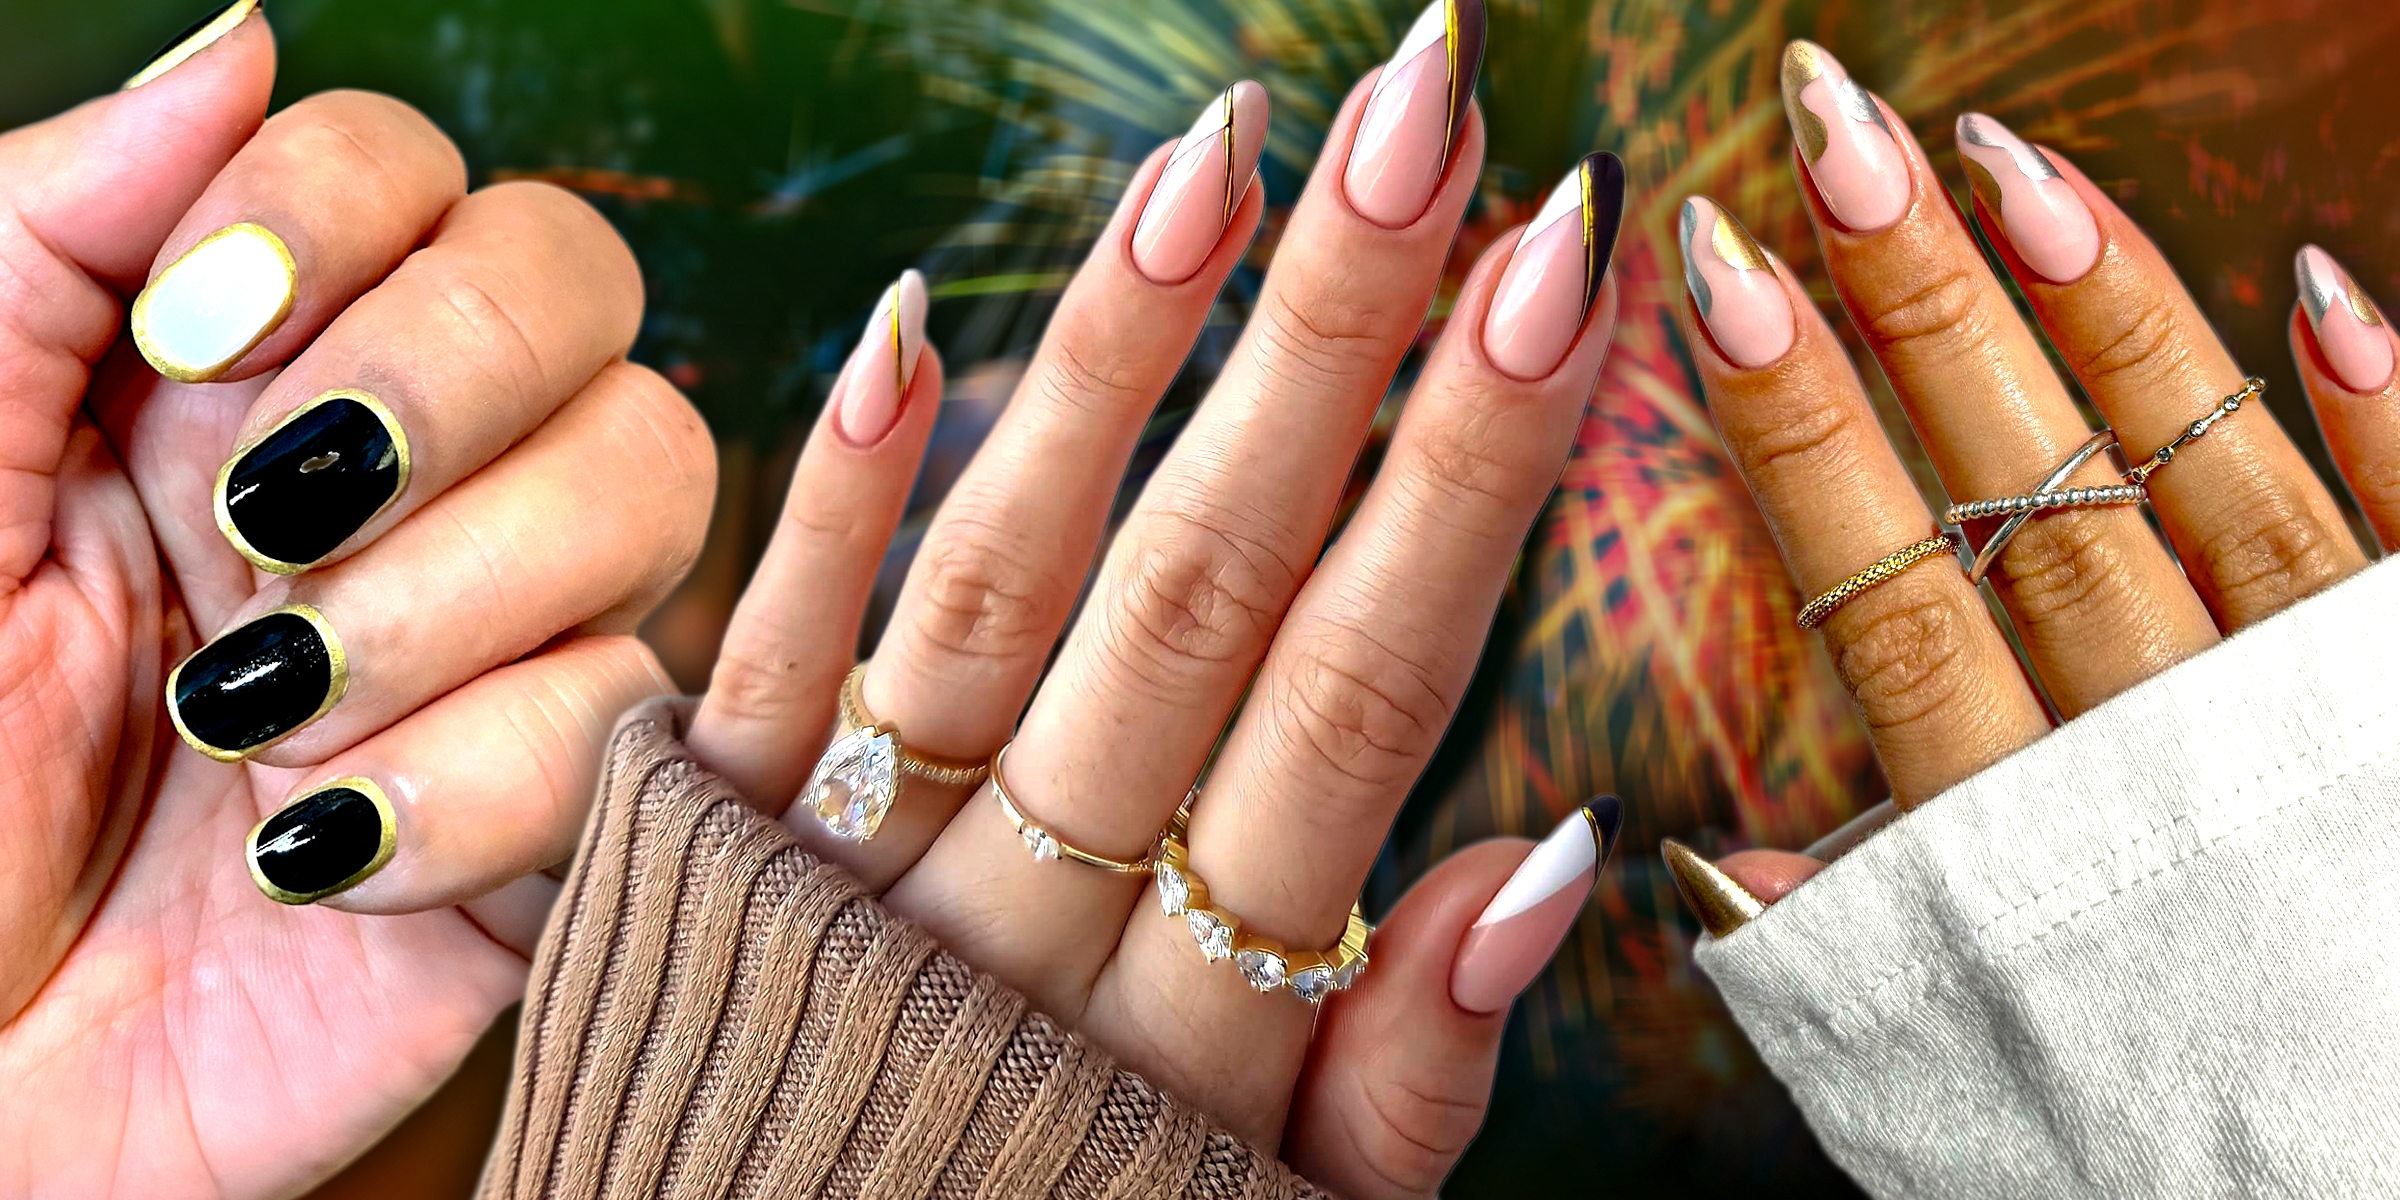 Golden Outlines | Ombré, White, and Gold V-Shaped French | Mixed Metals | Source: instagram.com/nailsinc | Shutterstock | instagram.com/jinsoon | instagram.com/thehotblend